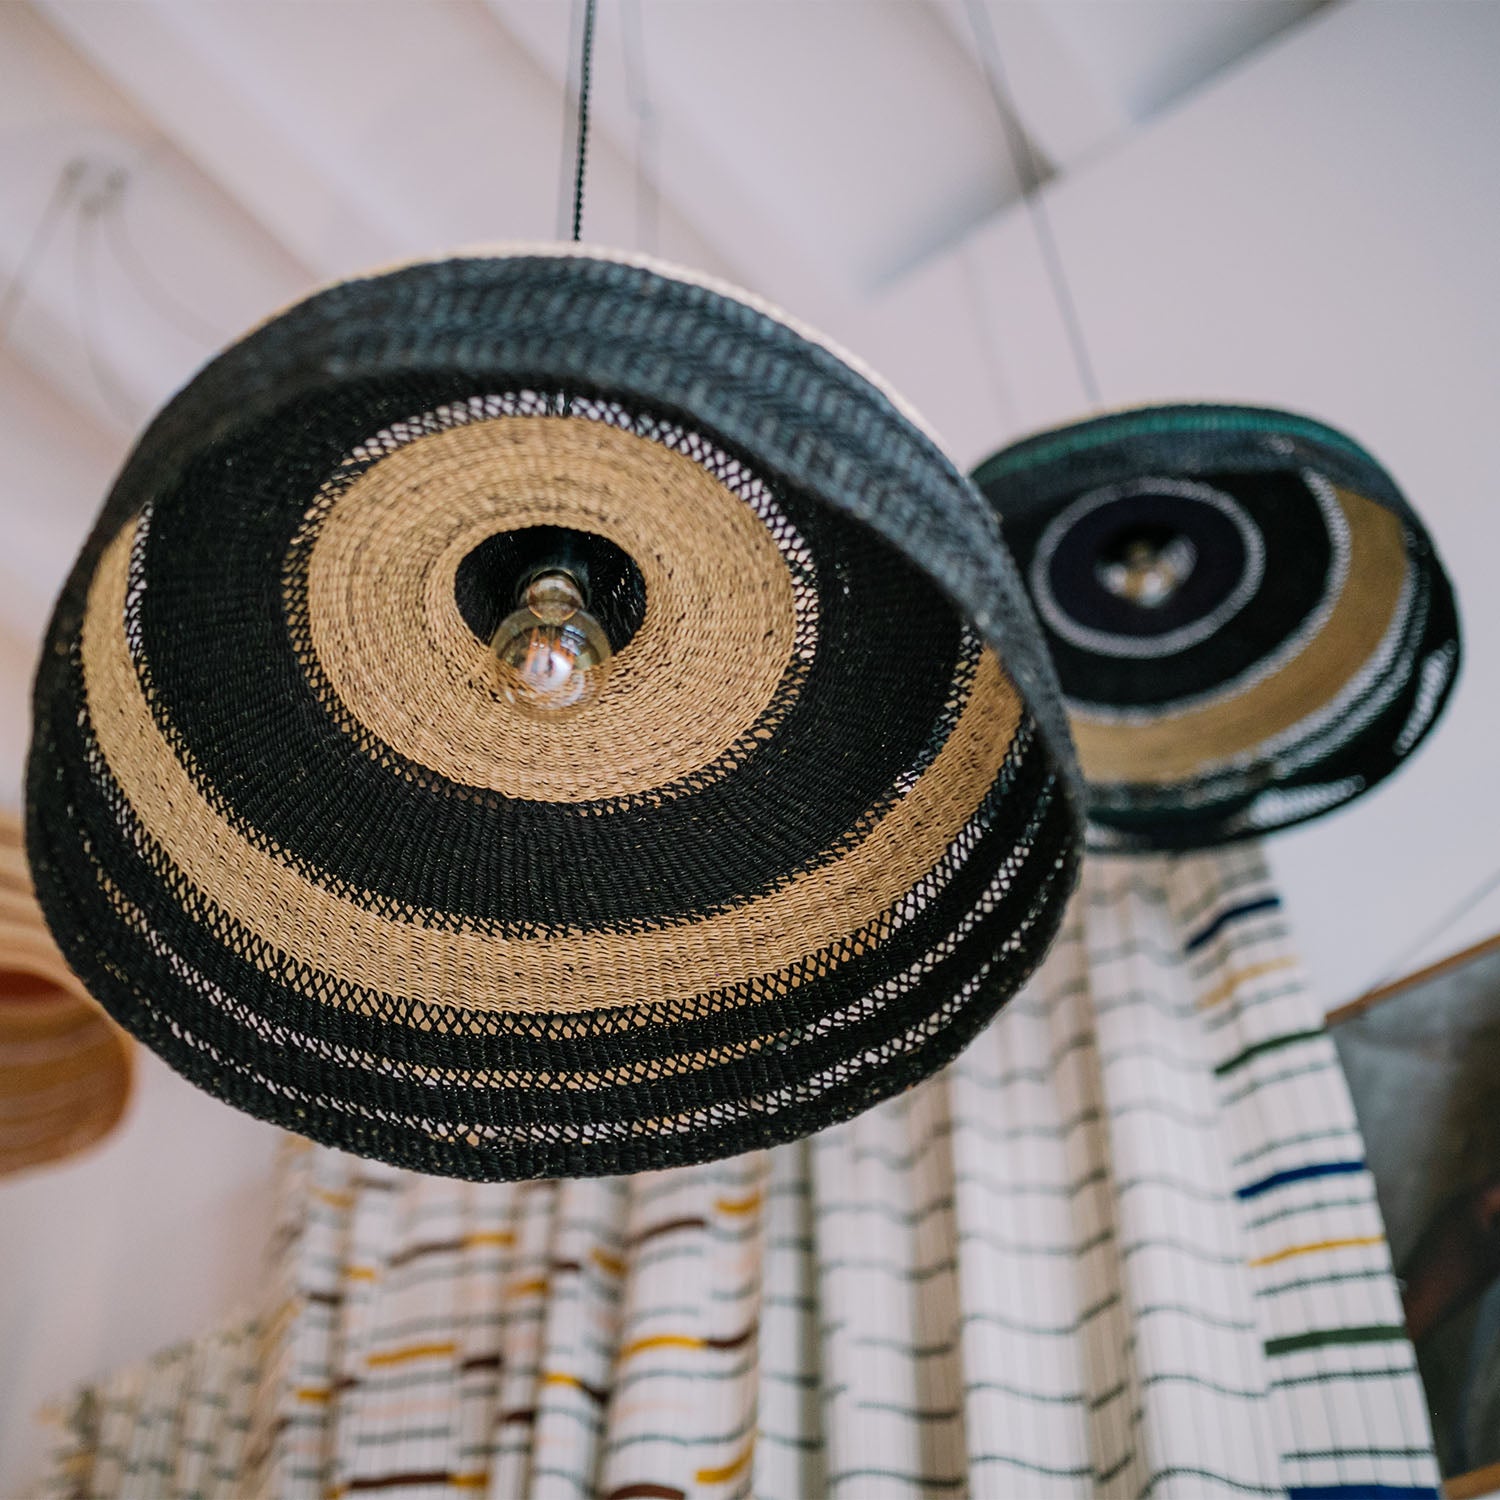 Two oversized woven hat-like light fixtures with concentric patterns.